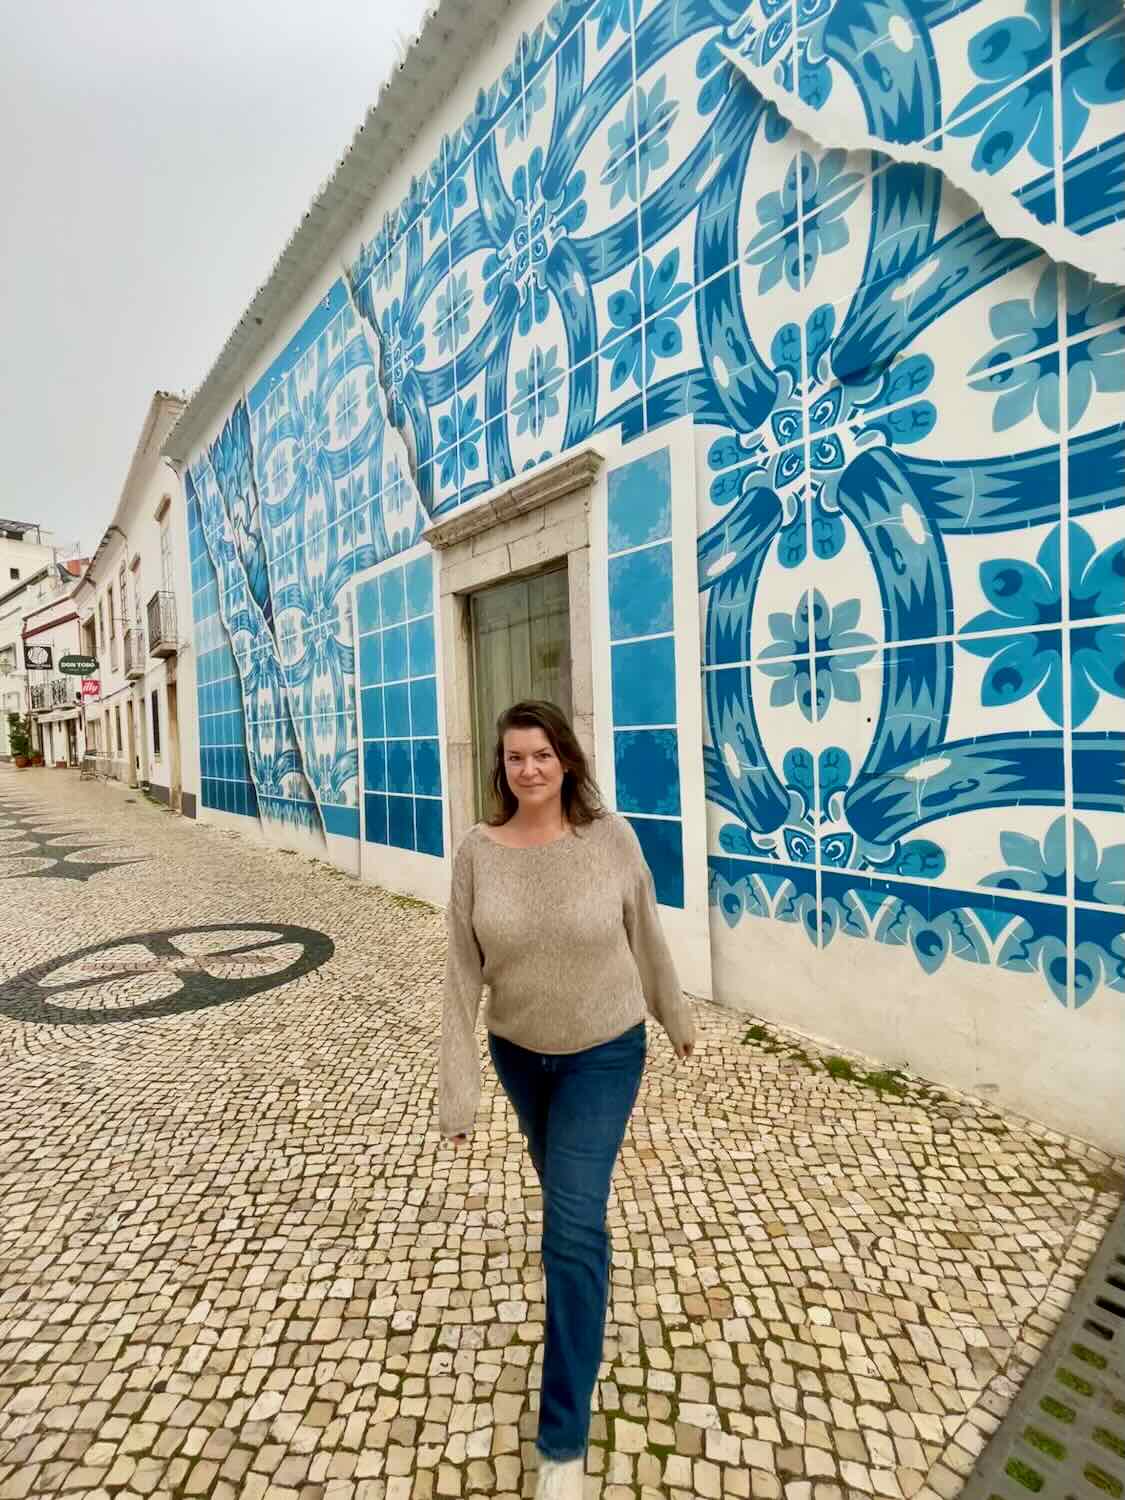 A woman walking on a cobblestone street in front of a building adorned with intricate blue and white tile designs in Portugal. She is wearing a beige sweater and blue jeans, with a relaxed and happy expression